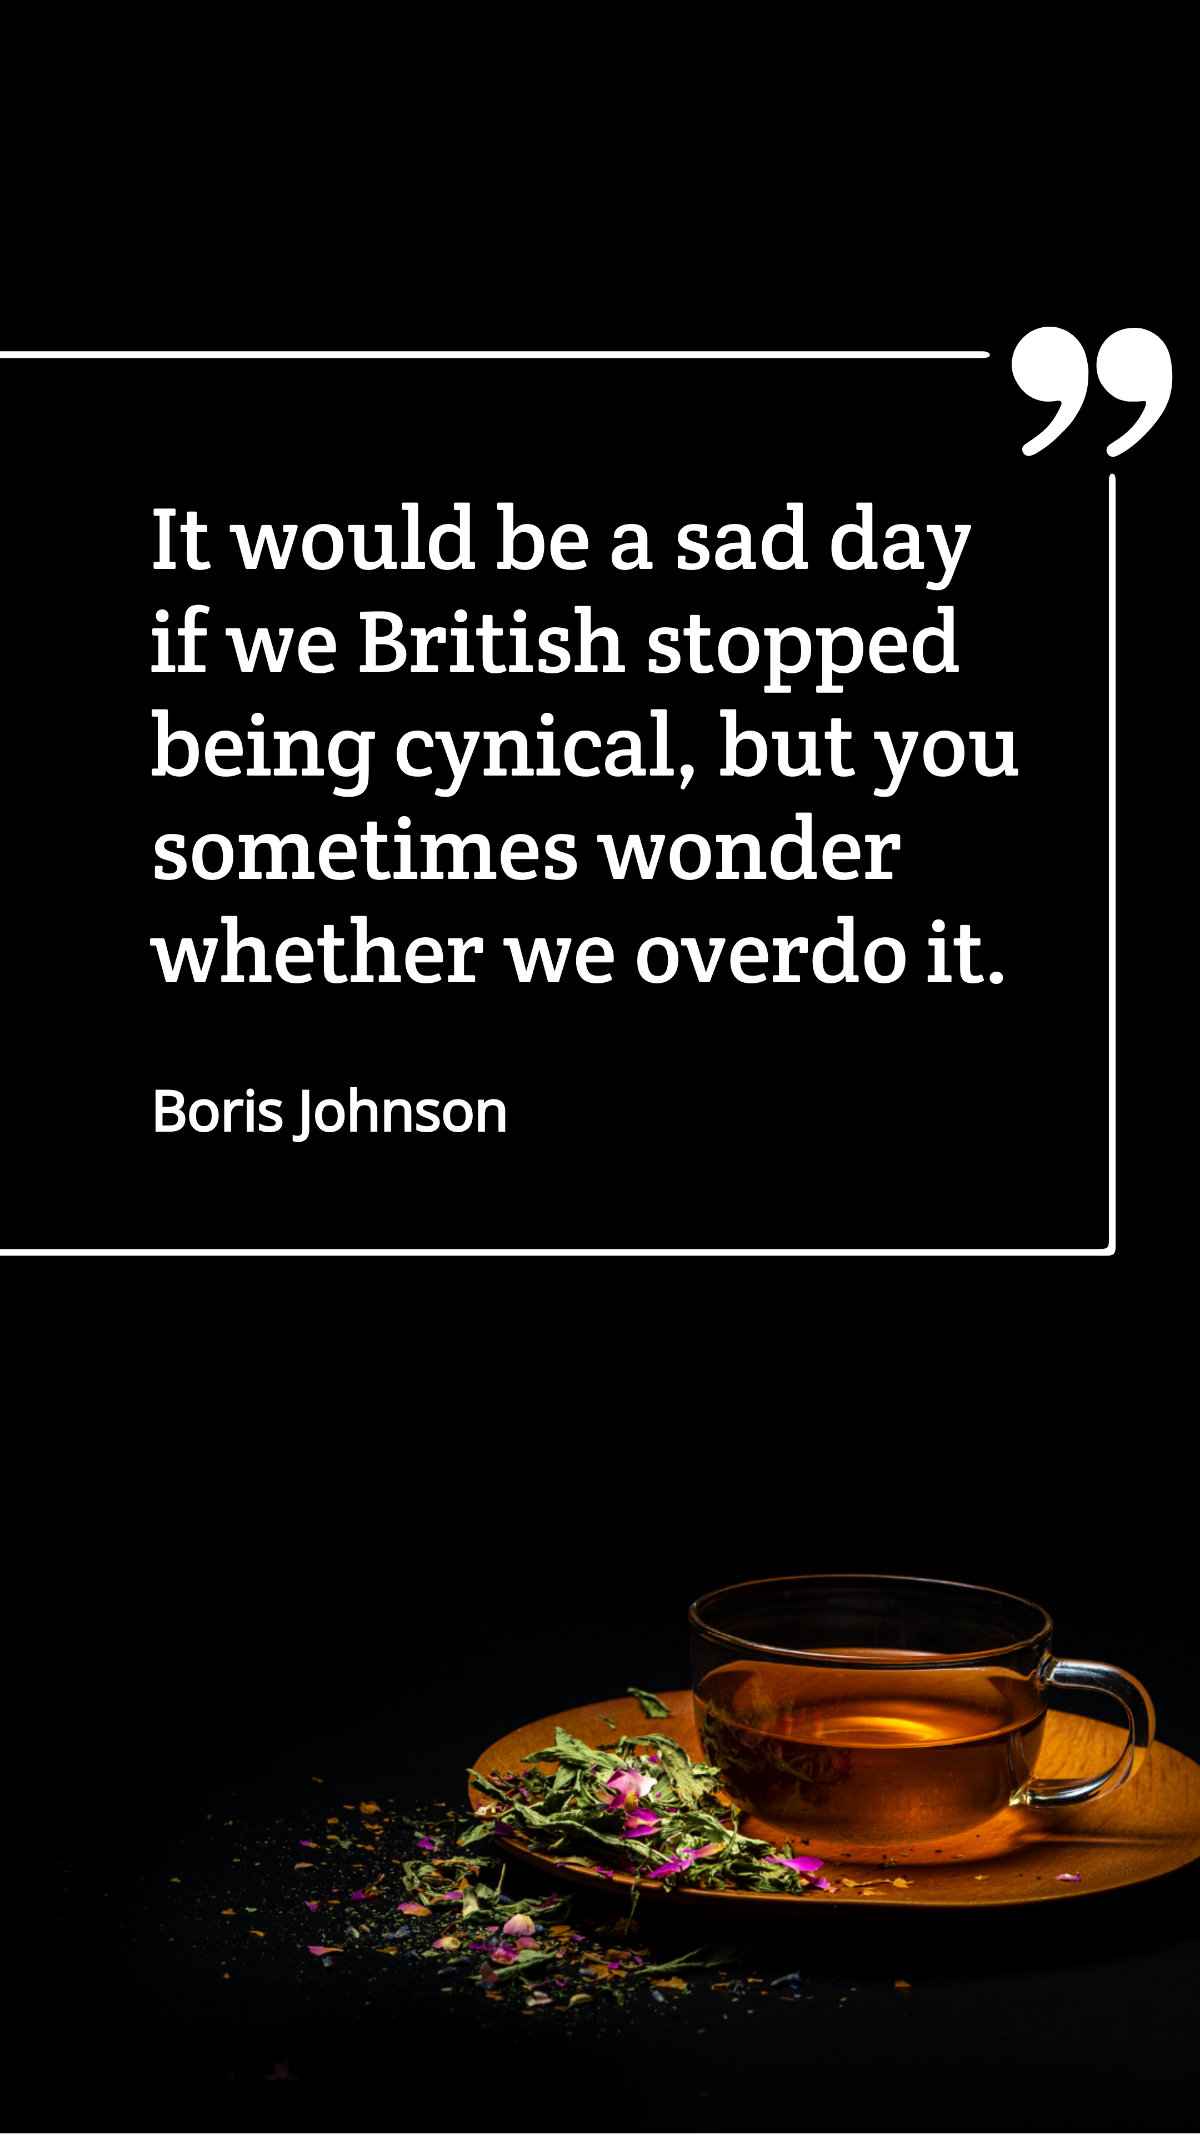 Boris Johnson - It would be a sad day if we British stopped being cynical, but you sometimes wonder whether we overdo it. Template